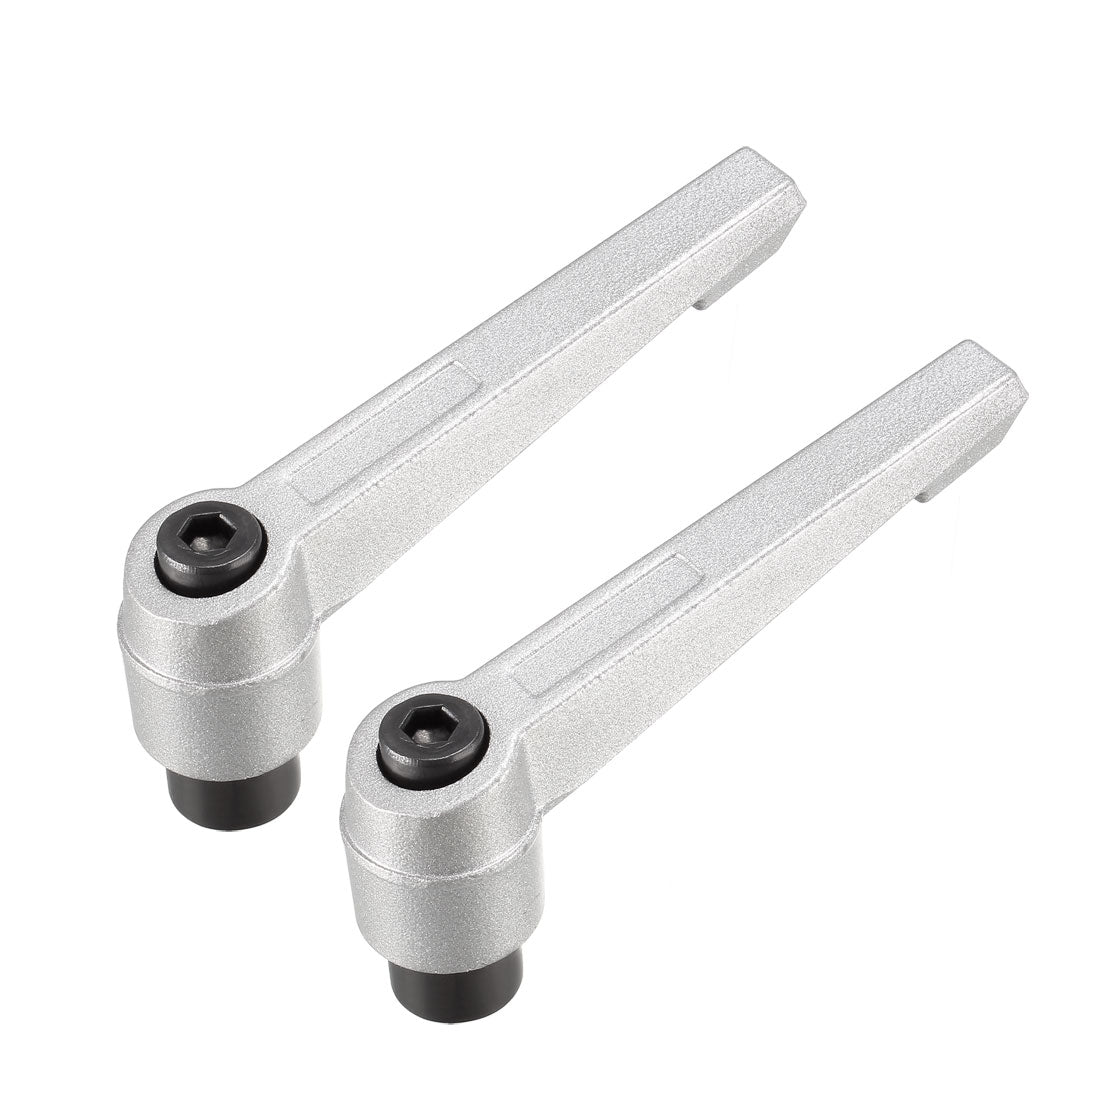 uxcell Uxcell M10 Handle Adjustable Clamping Lever Push Button Ratchet Female Threaded Stud 2 Pcs